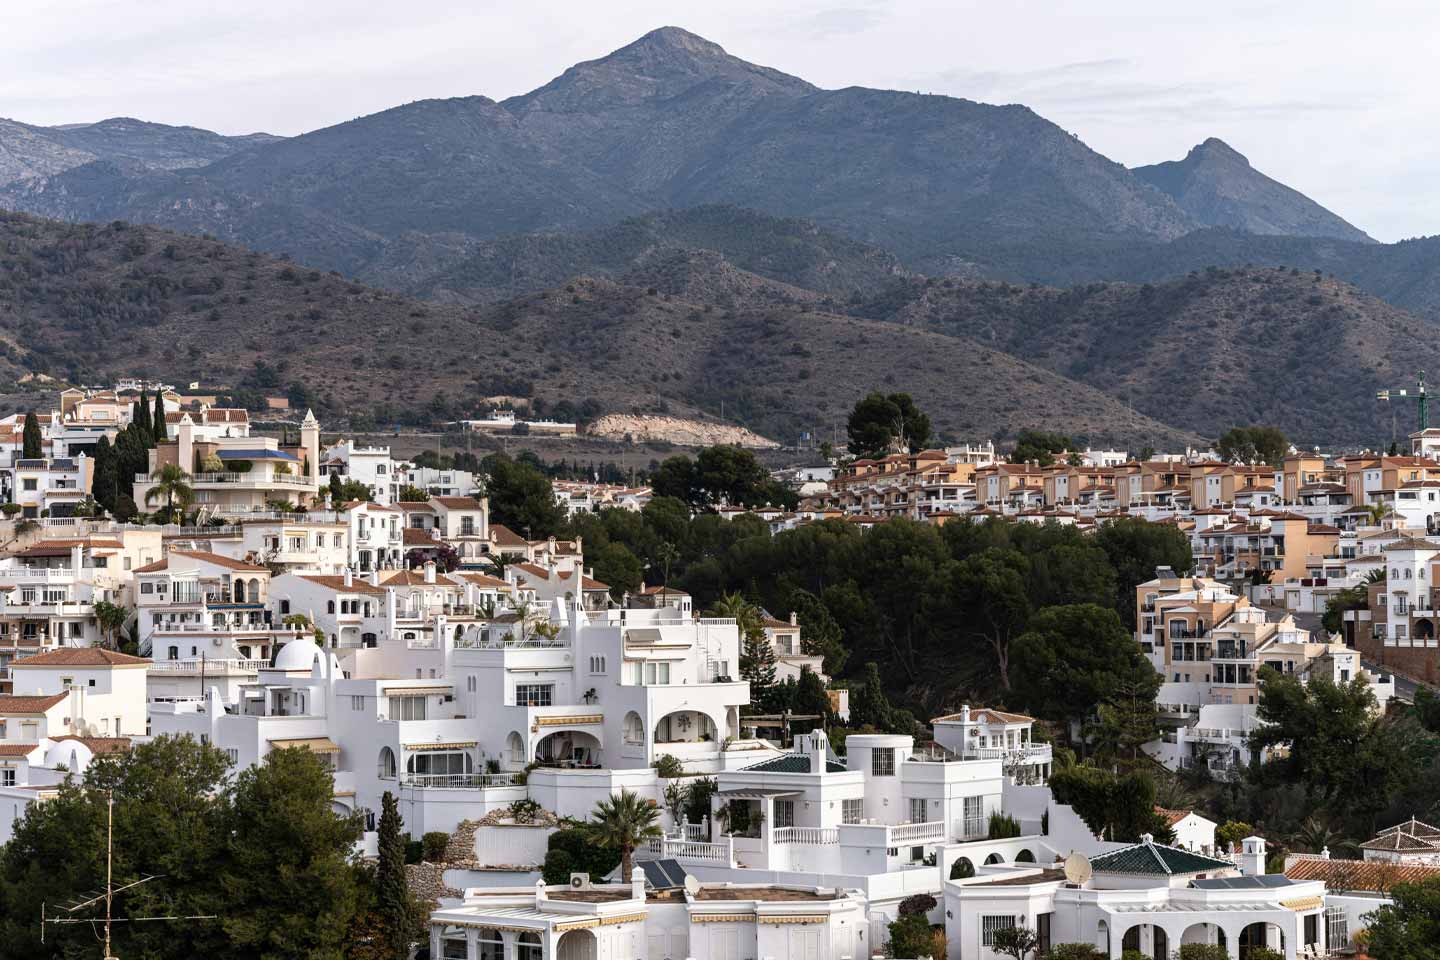 Whitewashed buildings and mountain views in Nerja, Spain